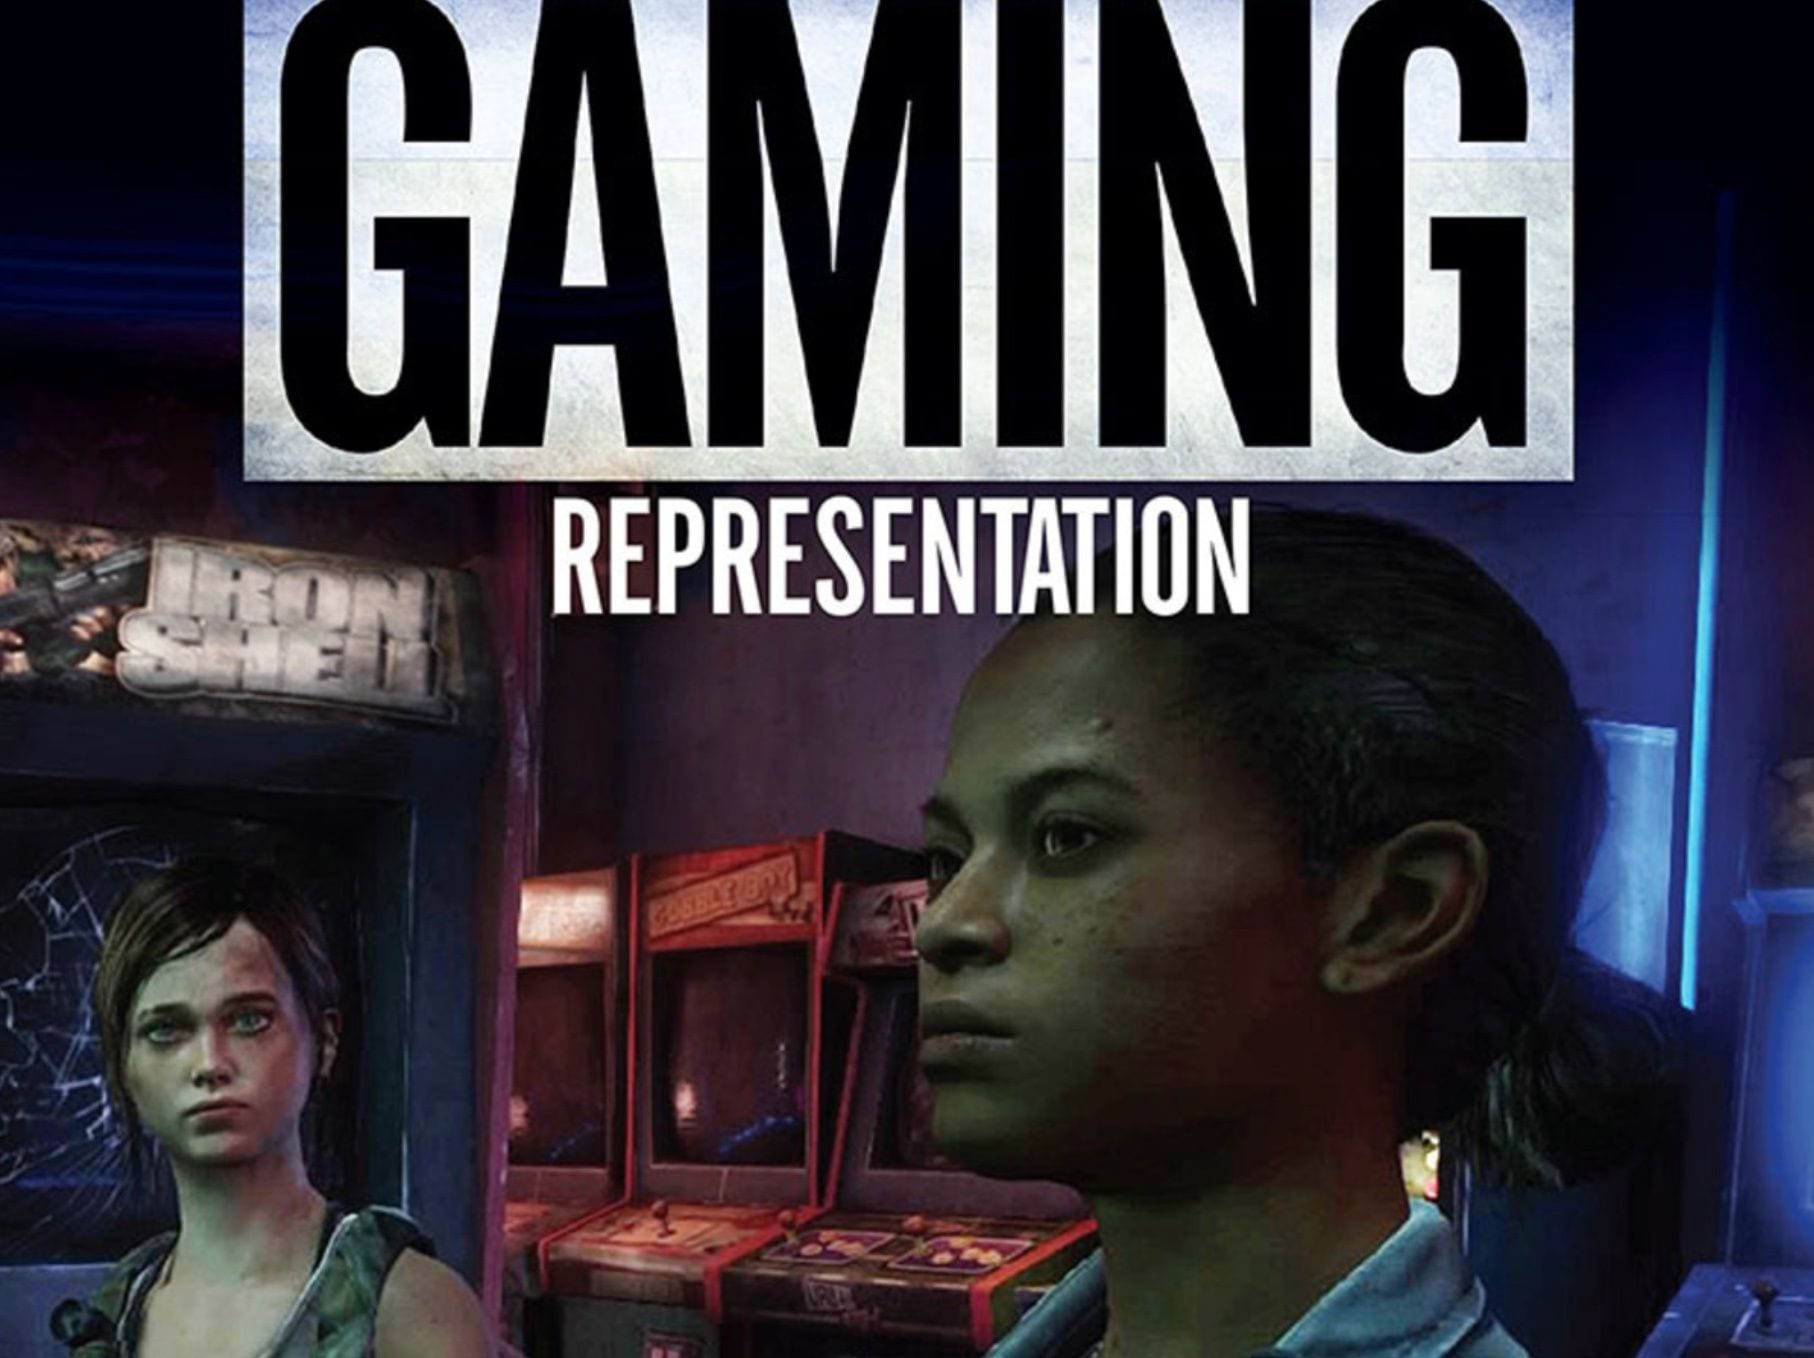 Academic Gamers: Your Assistance with ‘Gaming Representation’ Please